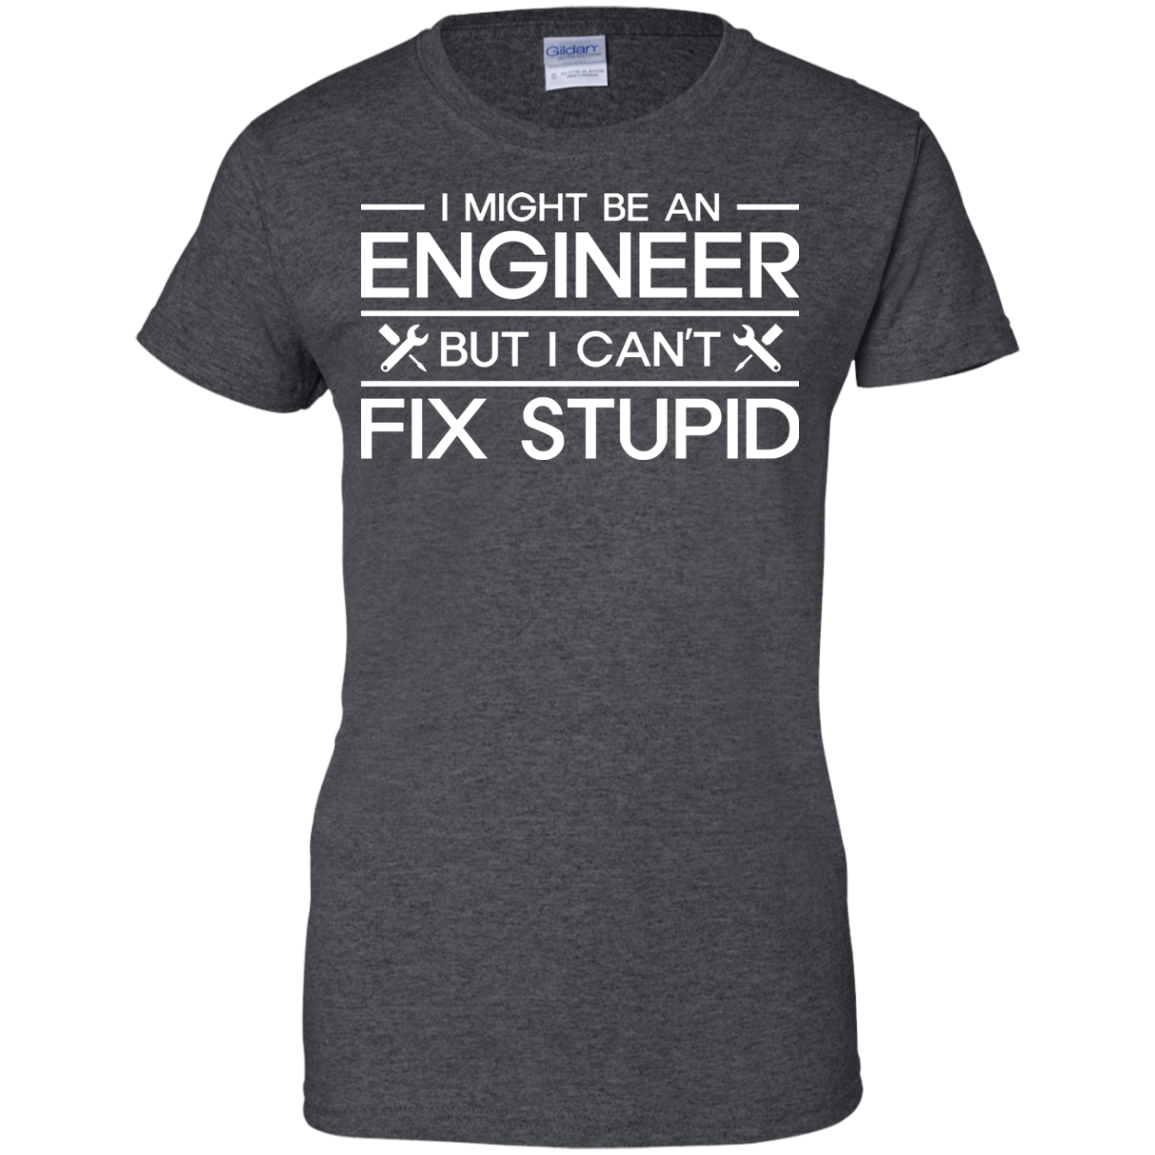 I Might Be An Engineer, But I Can't Fix Stupid